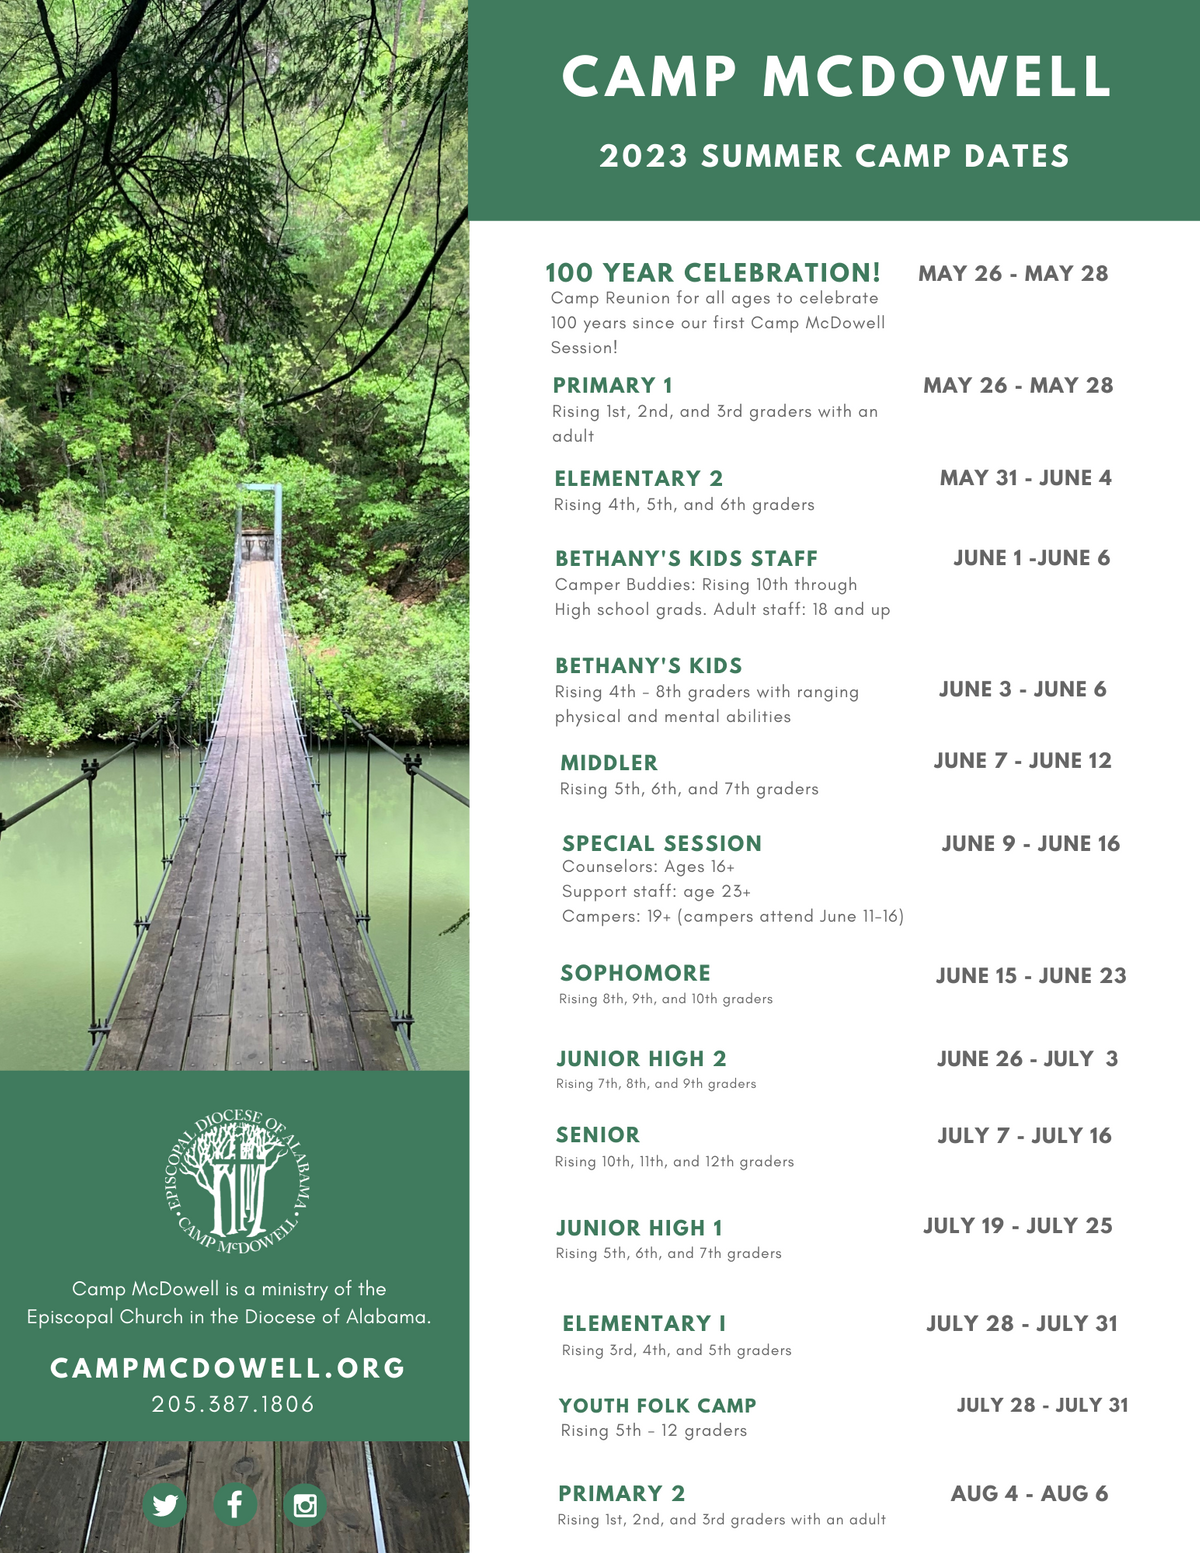 Dates & Rates - Camp McDowell